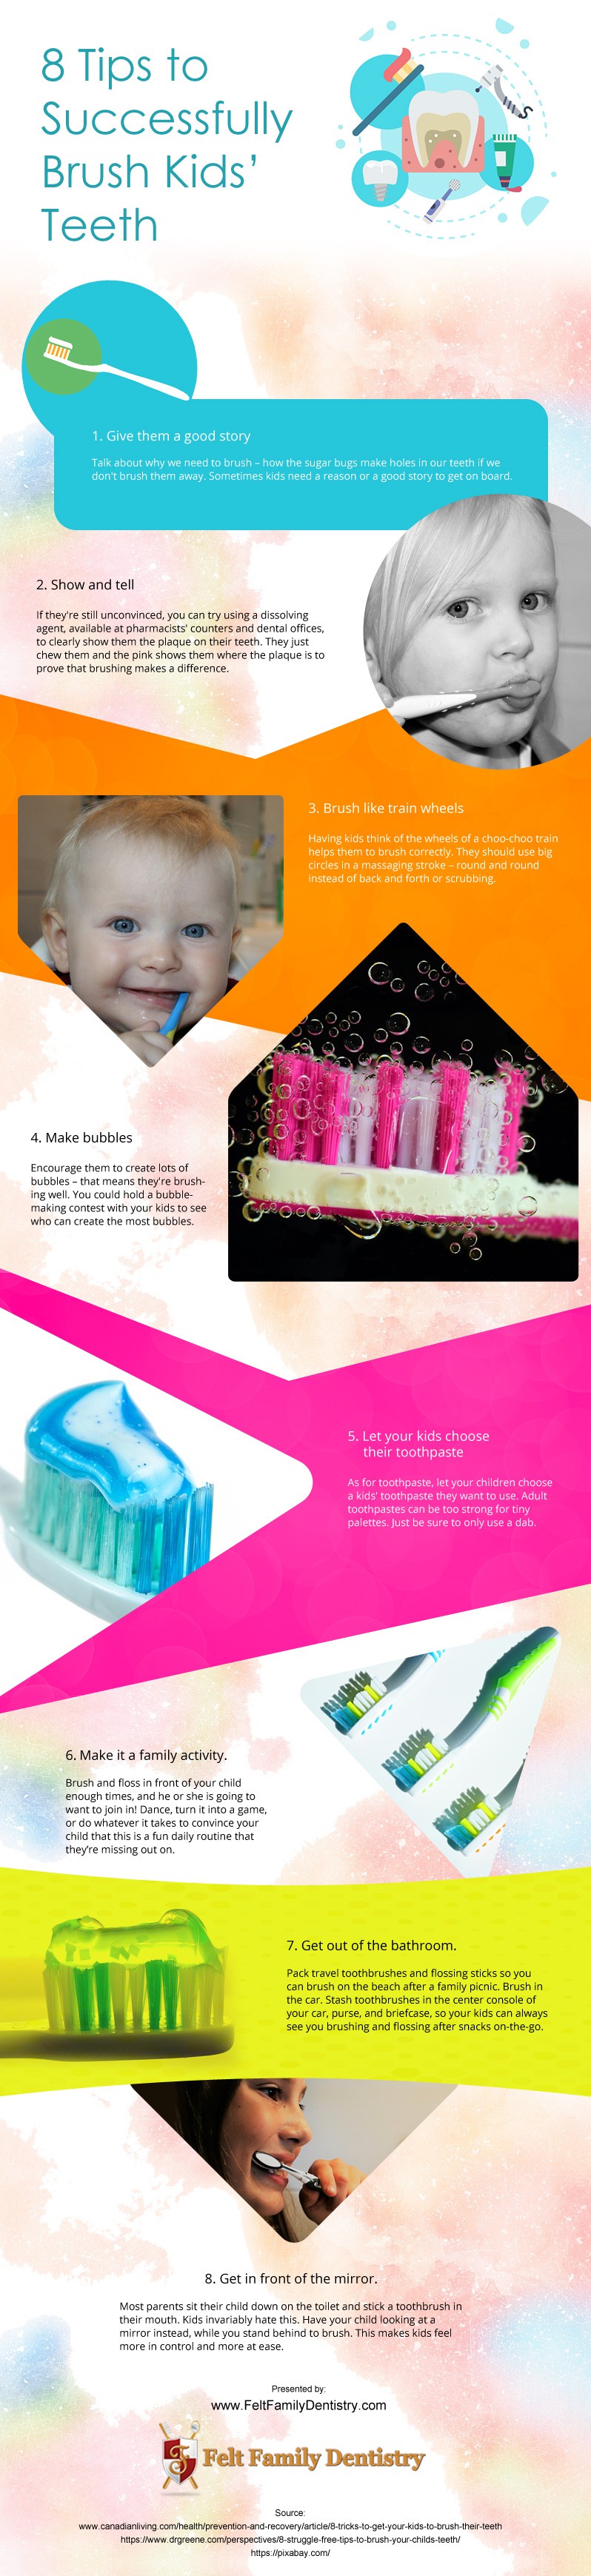 8 Tips to Successfully Brush Kids’ Teeth [infographic]